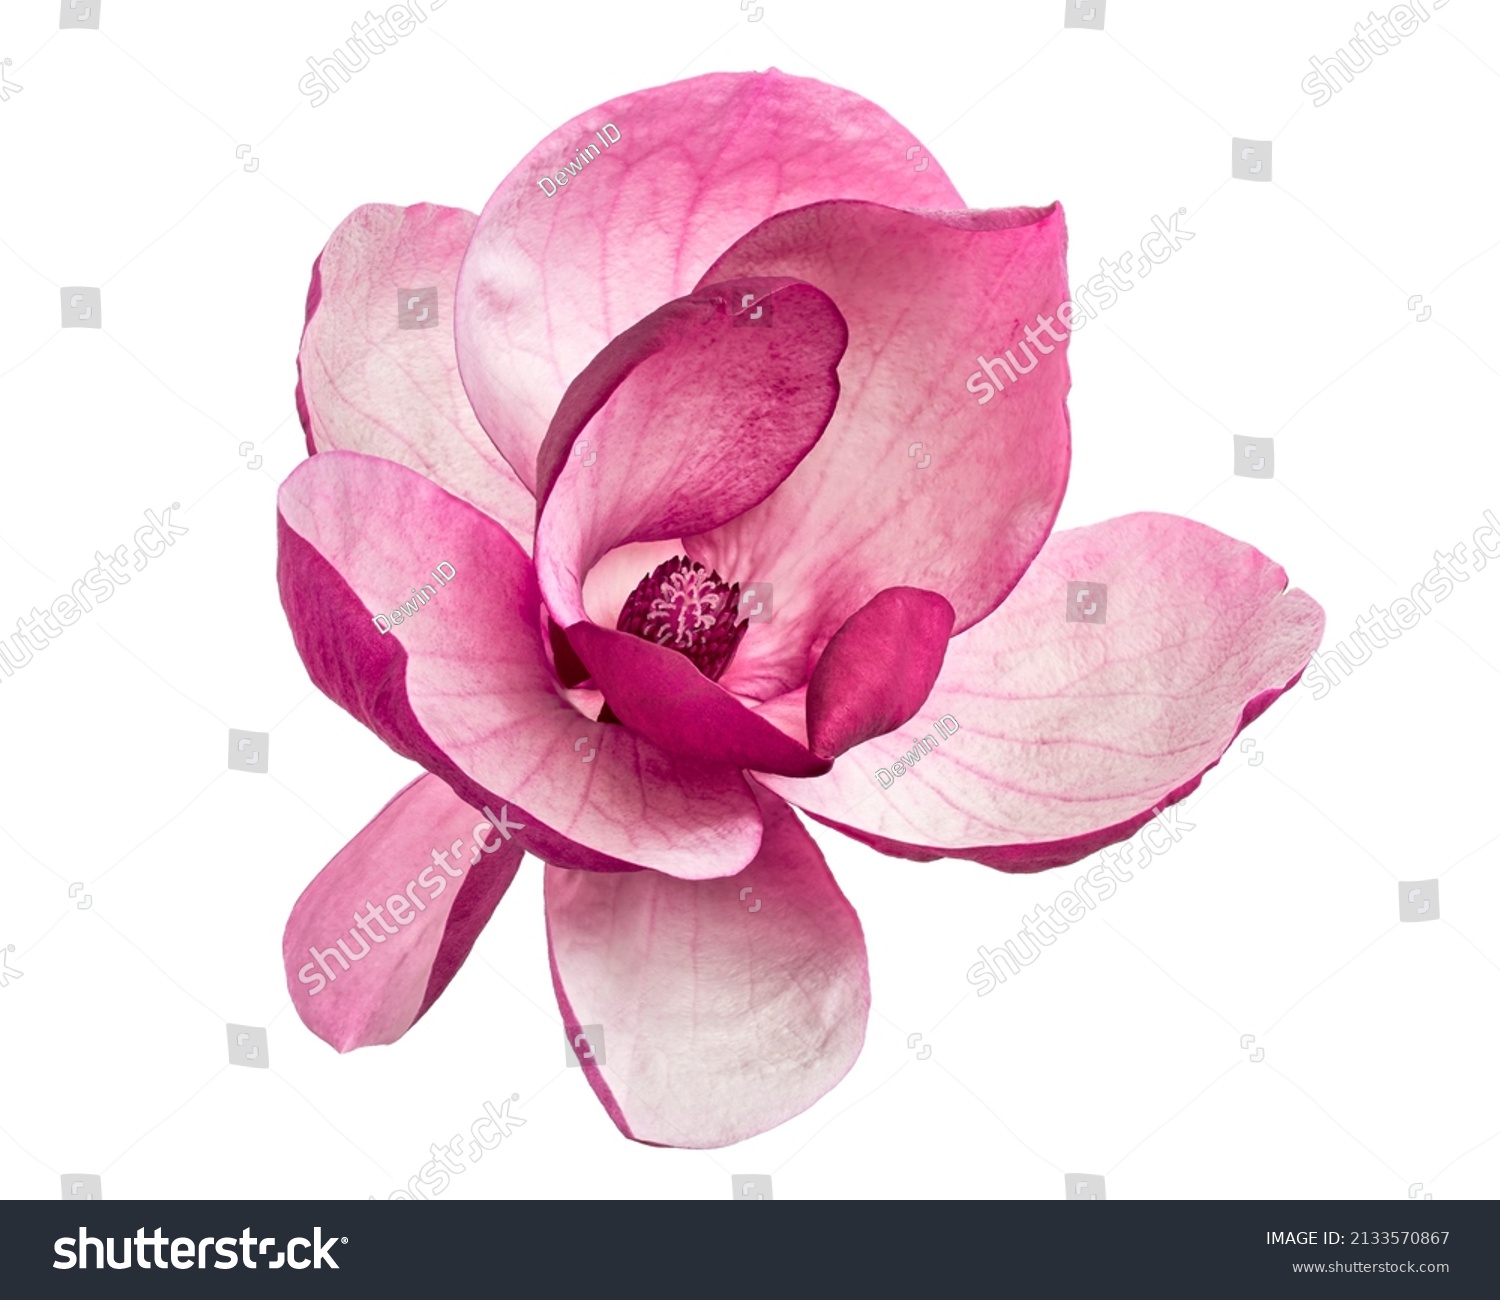 Purple magnolia flower, Magnolia felix isolated on white background, with clipping path                               #2133570867